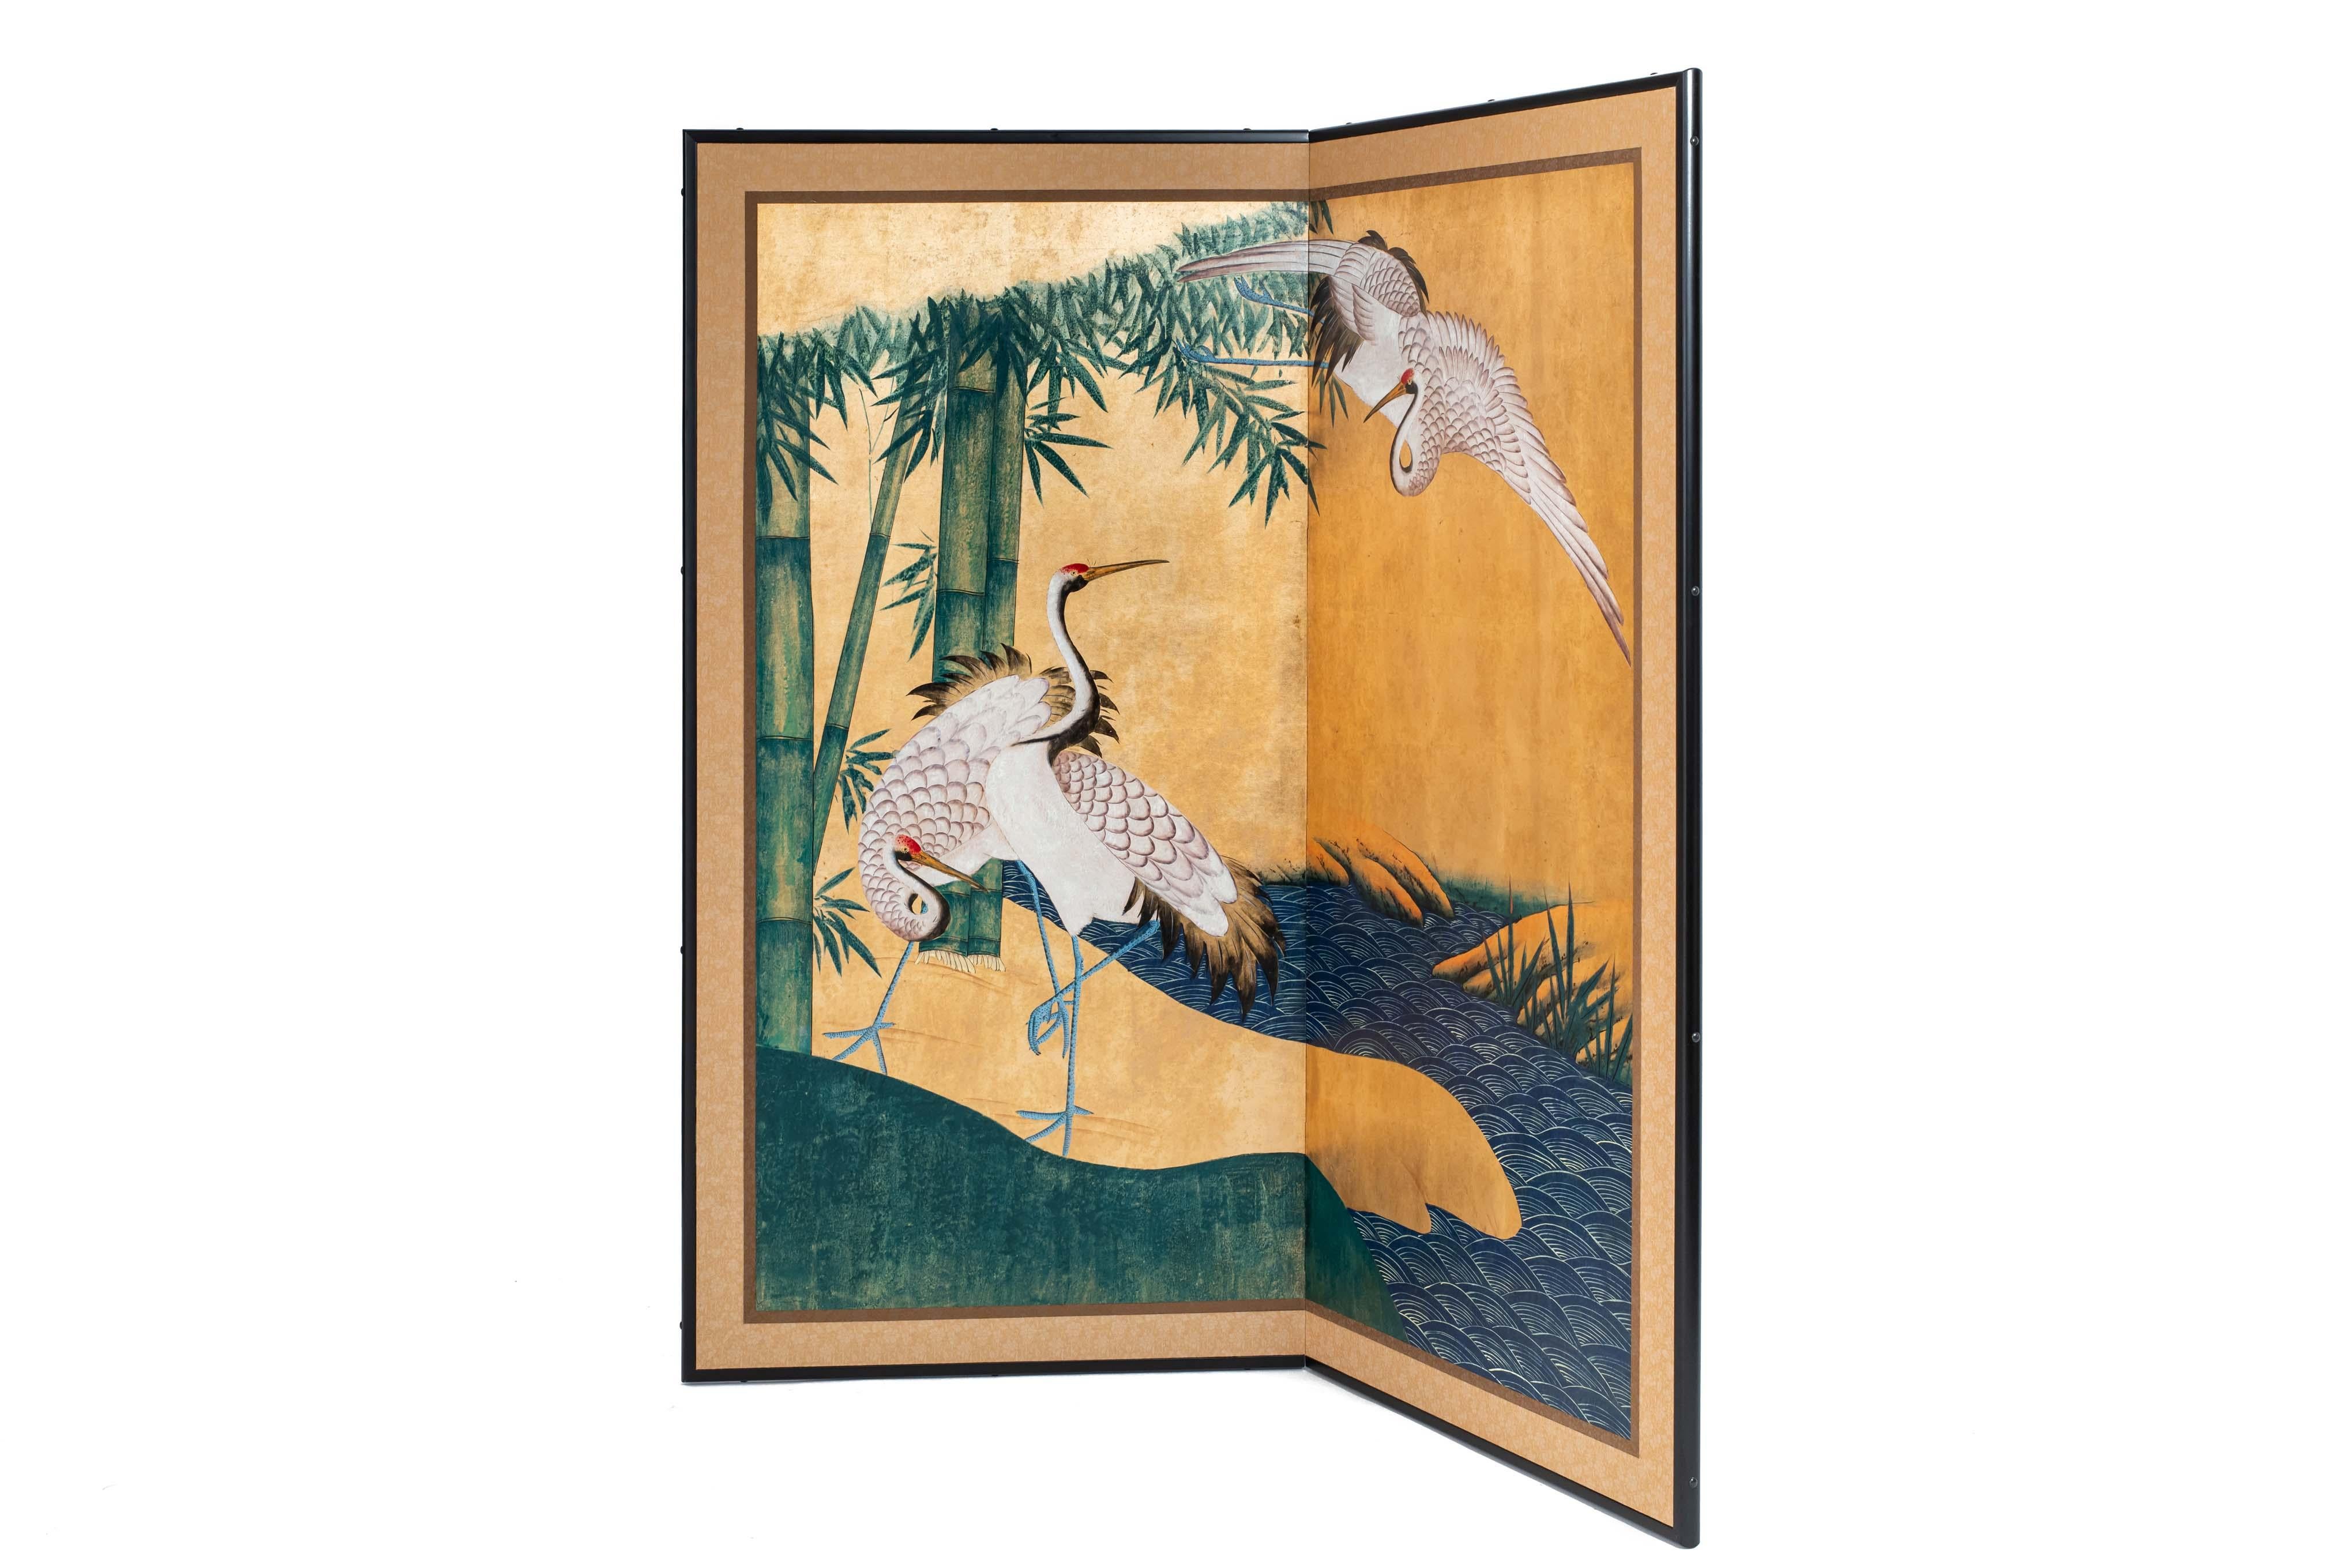 Contemporary Hand-Painted Japanese Screen of Cranes by the River (Chinesisch) im Angebot